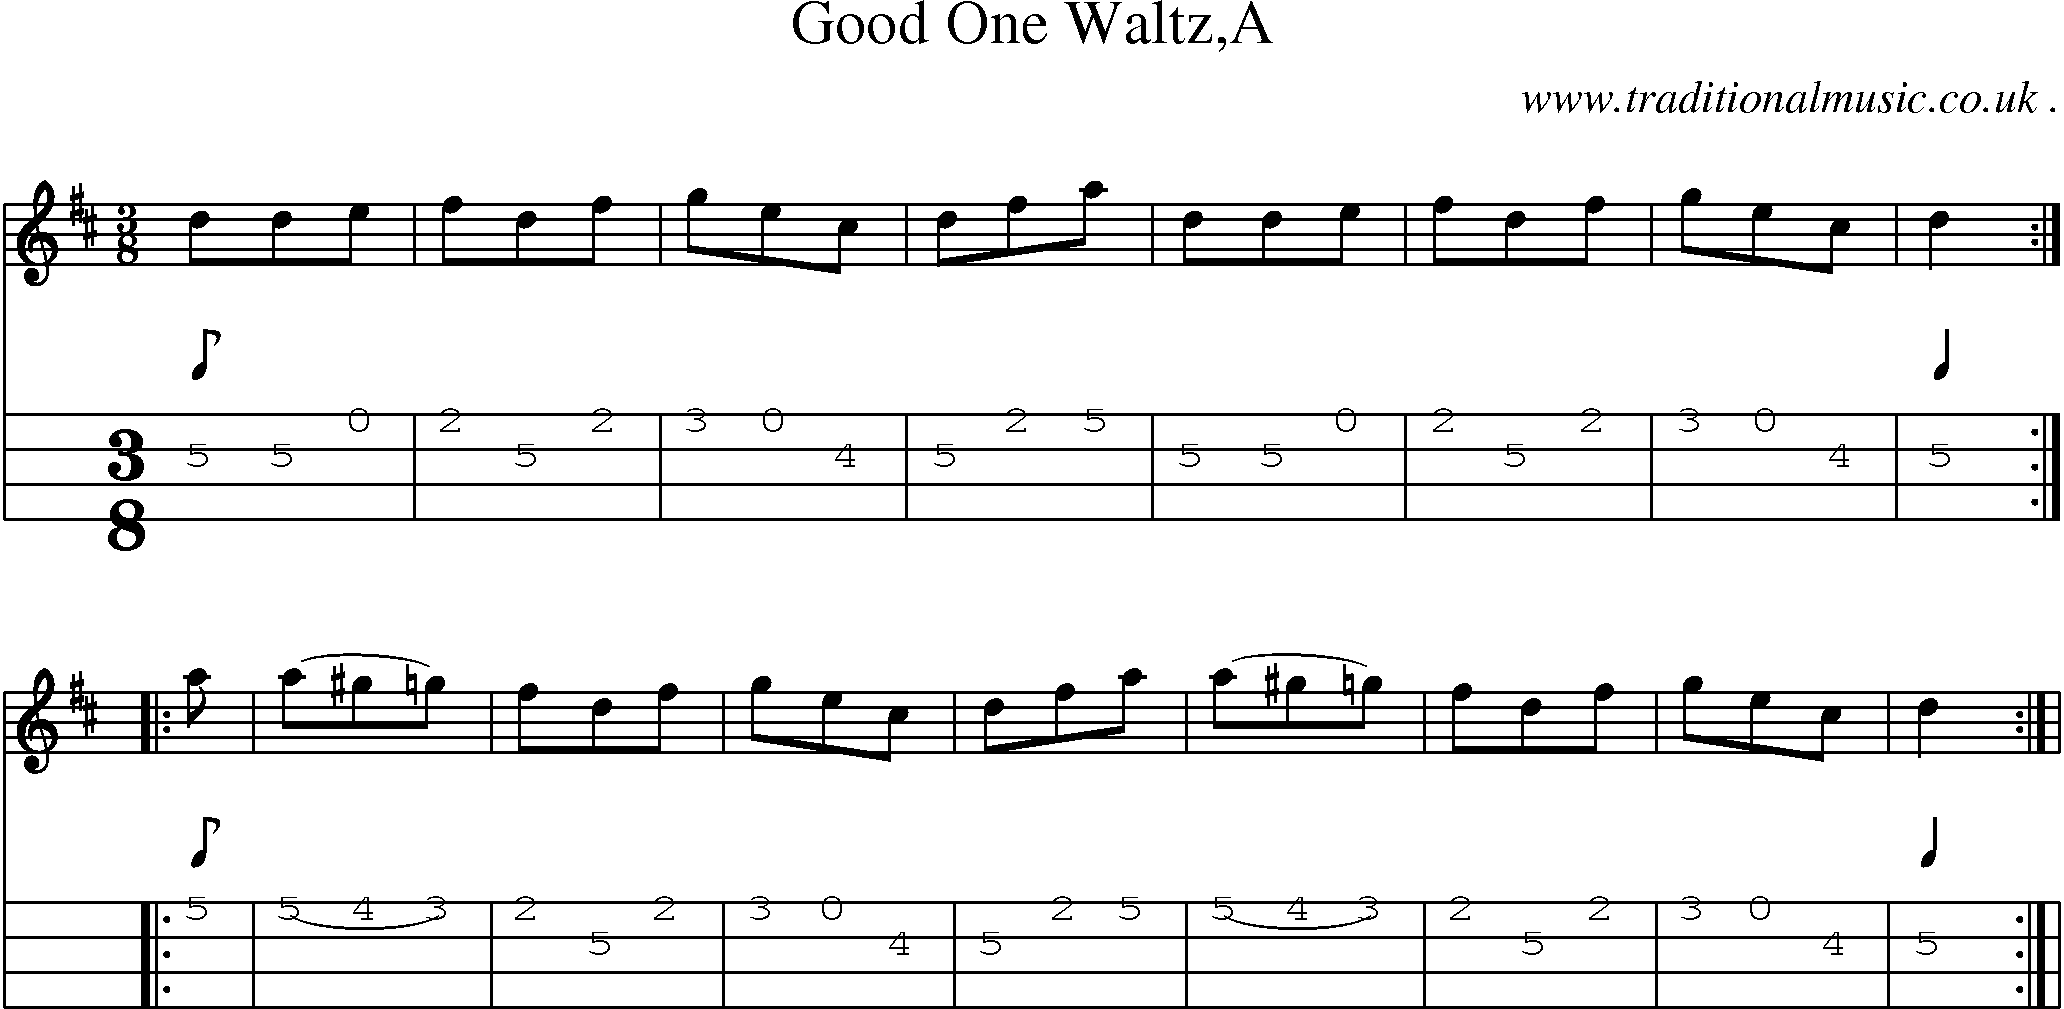 Sheet-Music and Mandolin Tabs for Good One Waltza